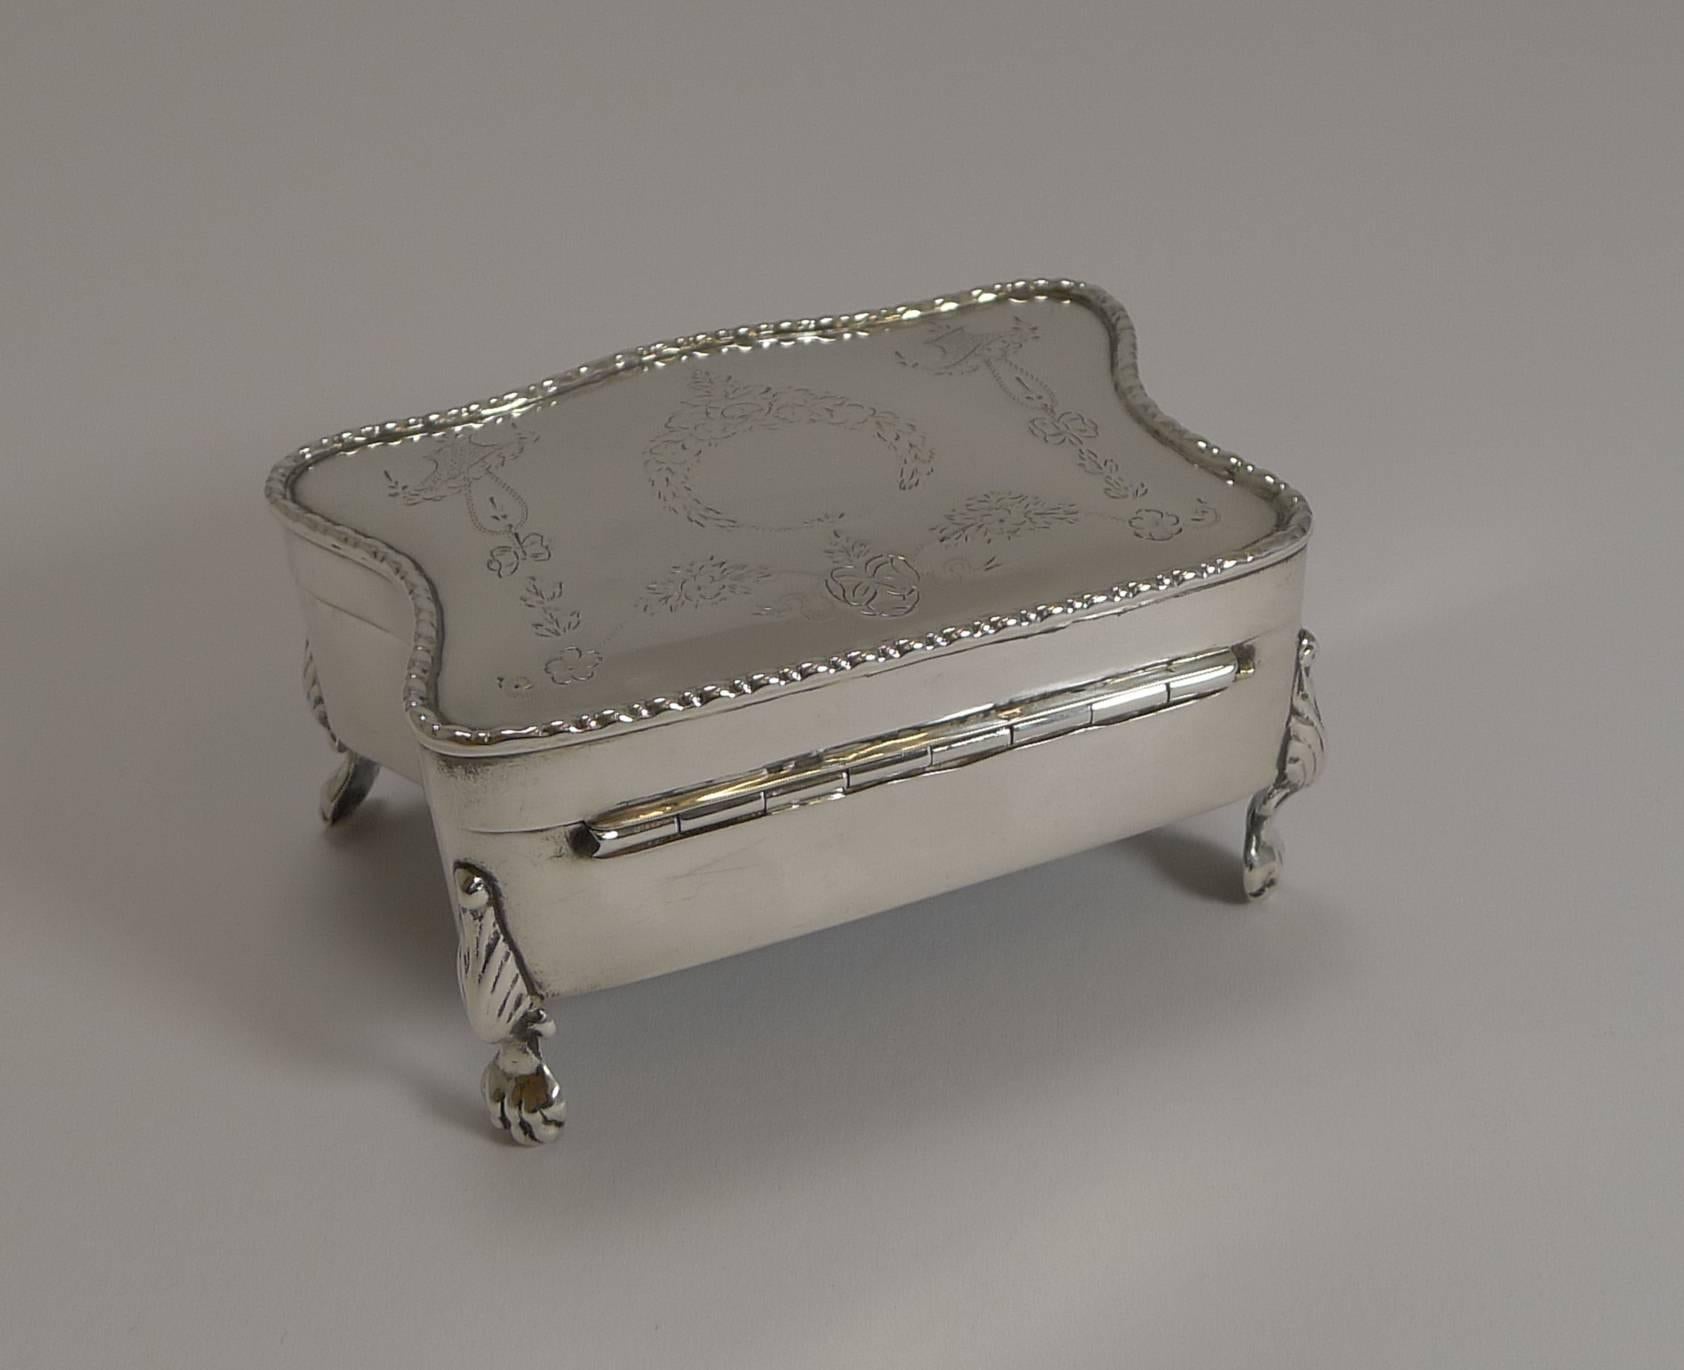 Early 20th Century Antique English Sterling Silver Jewelry Box, 1911